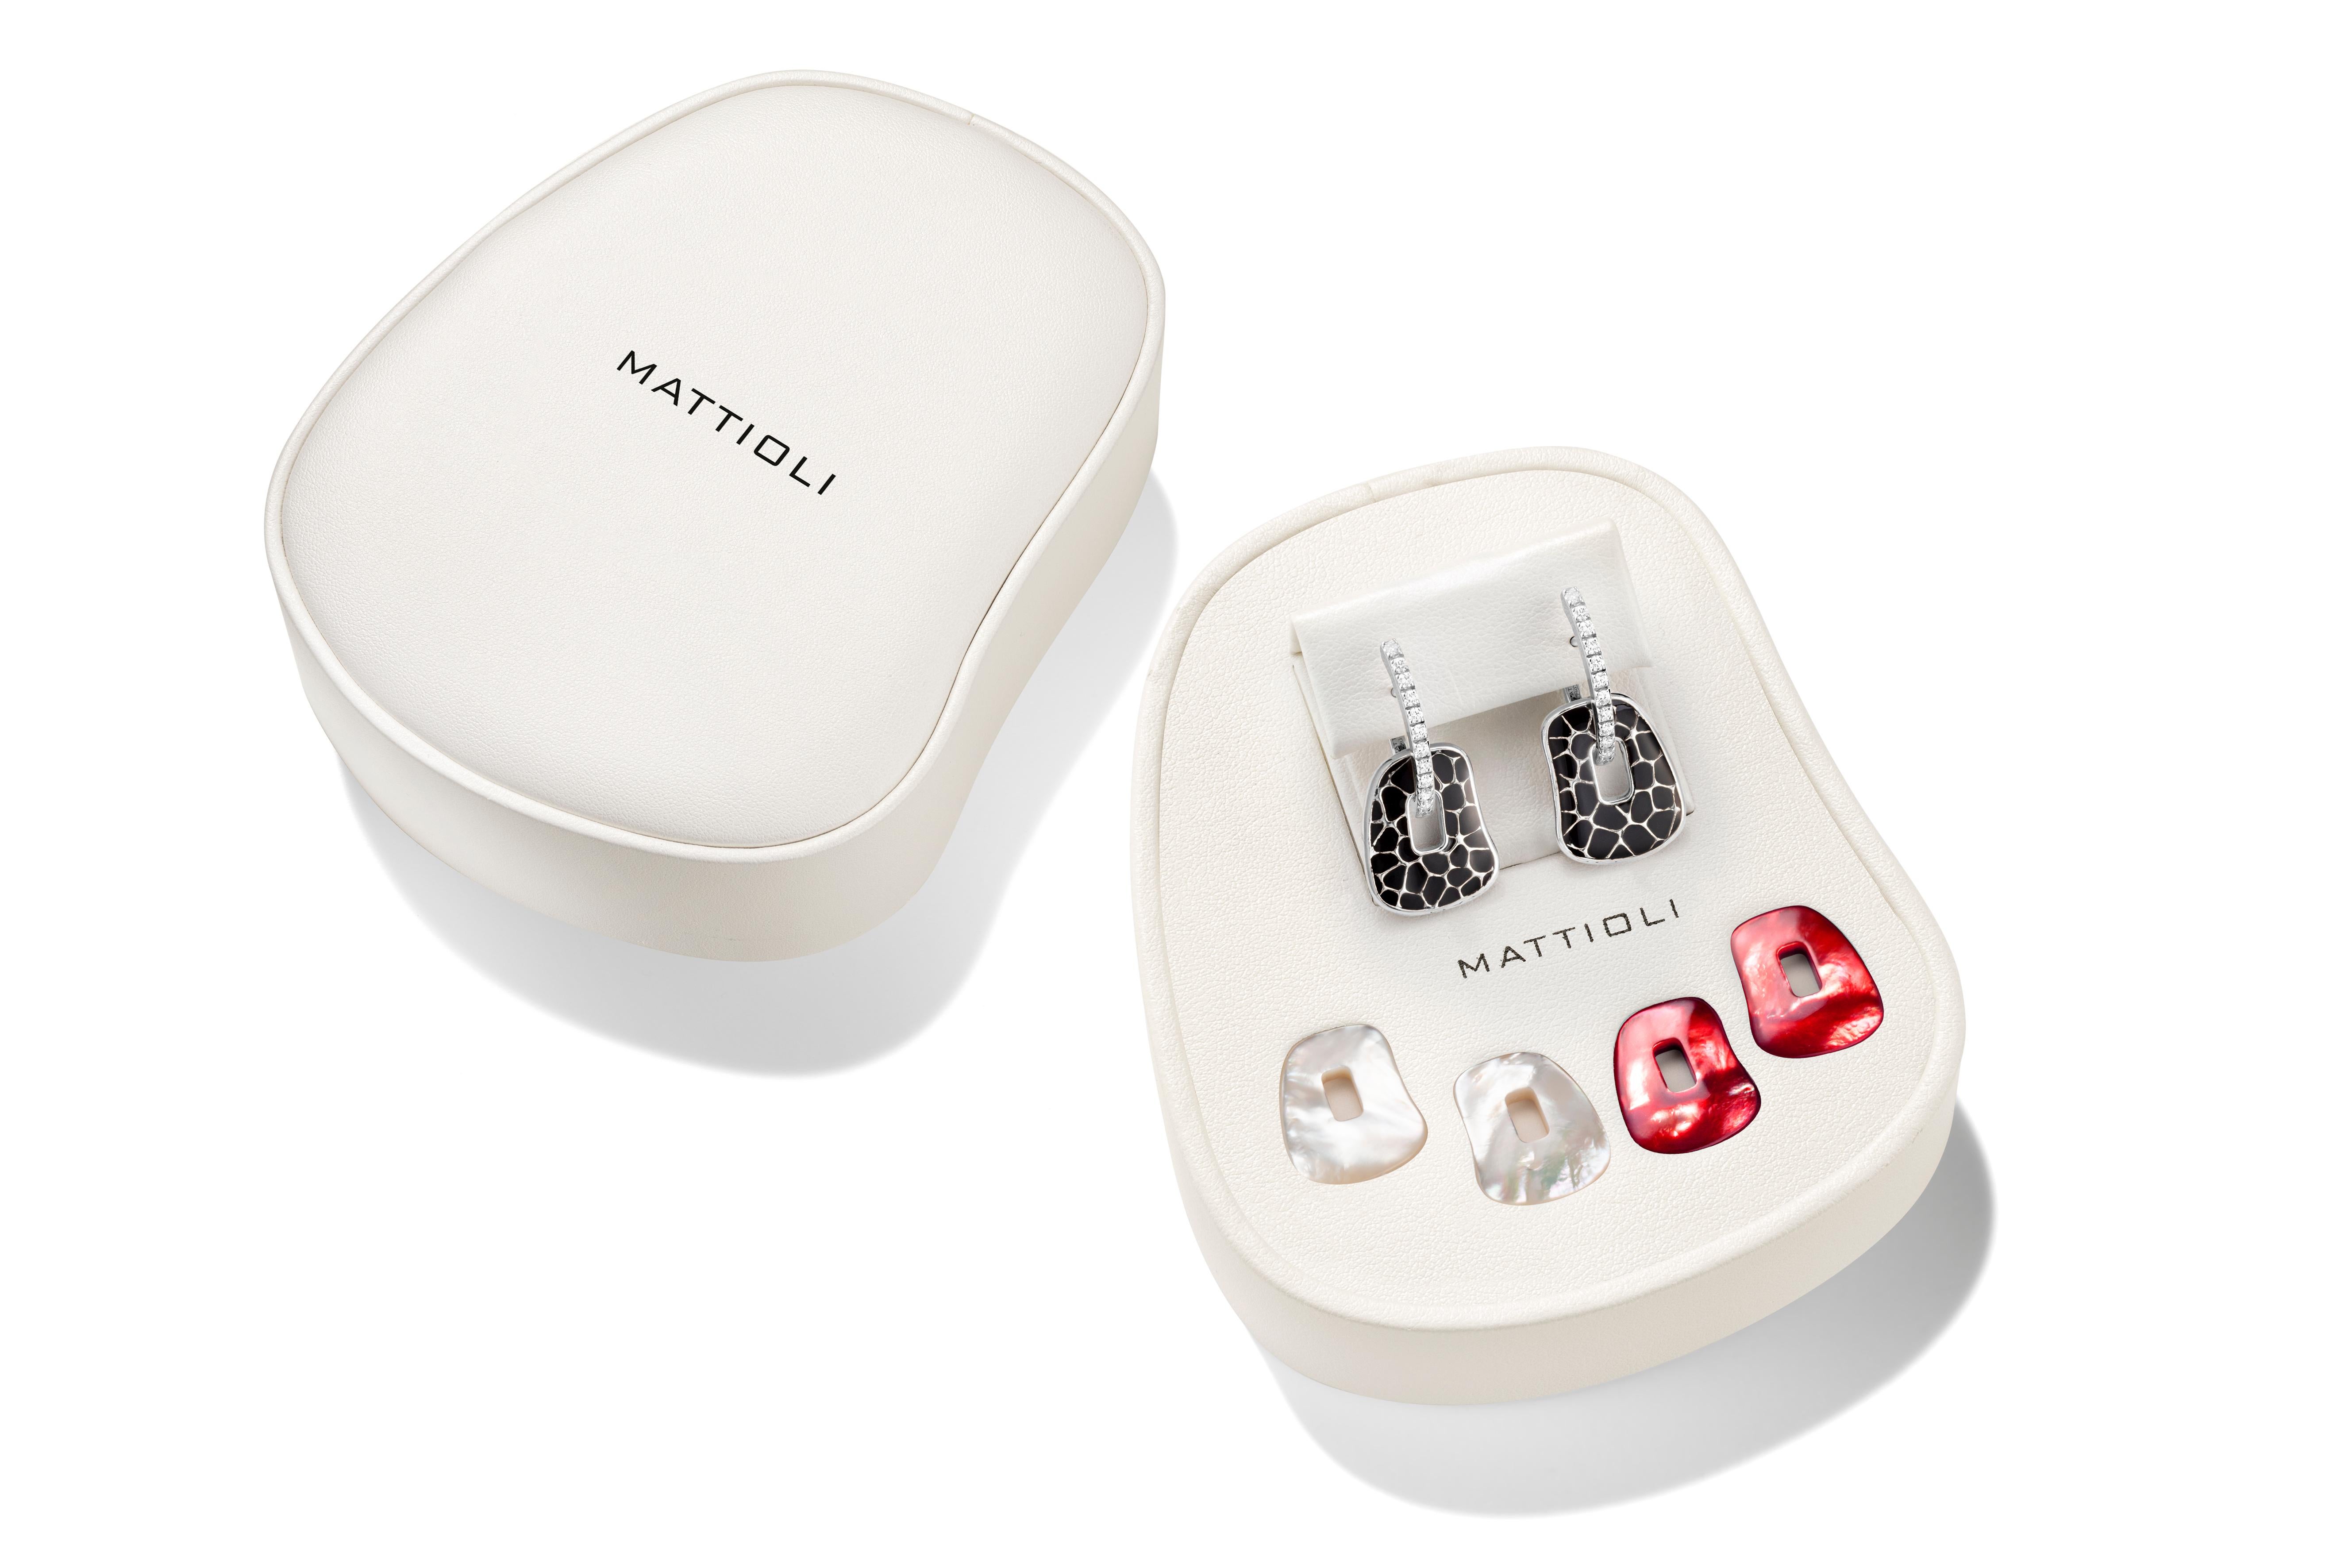 Mattioli Puzzle Safari Earrings 18K White Gold Black Enamel White Diamonds Small Size
Weight 10.80 gr 
Measure 15x18mm or 0.60x0.70 in
Puzzle pendants of mother of pearl you can choose between 25 colour palette
Also Available in Rose Gold & Brown